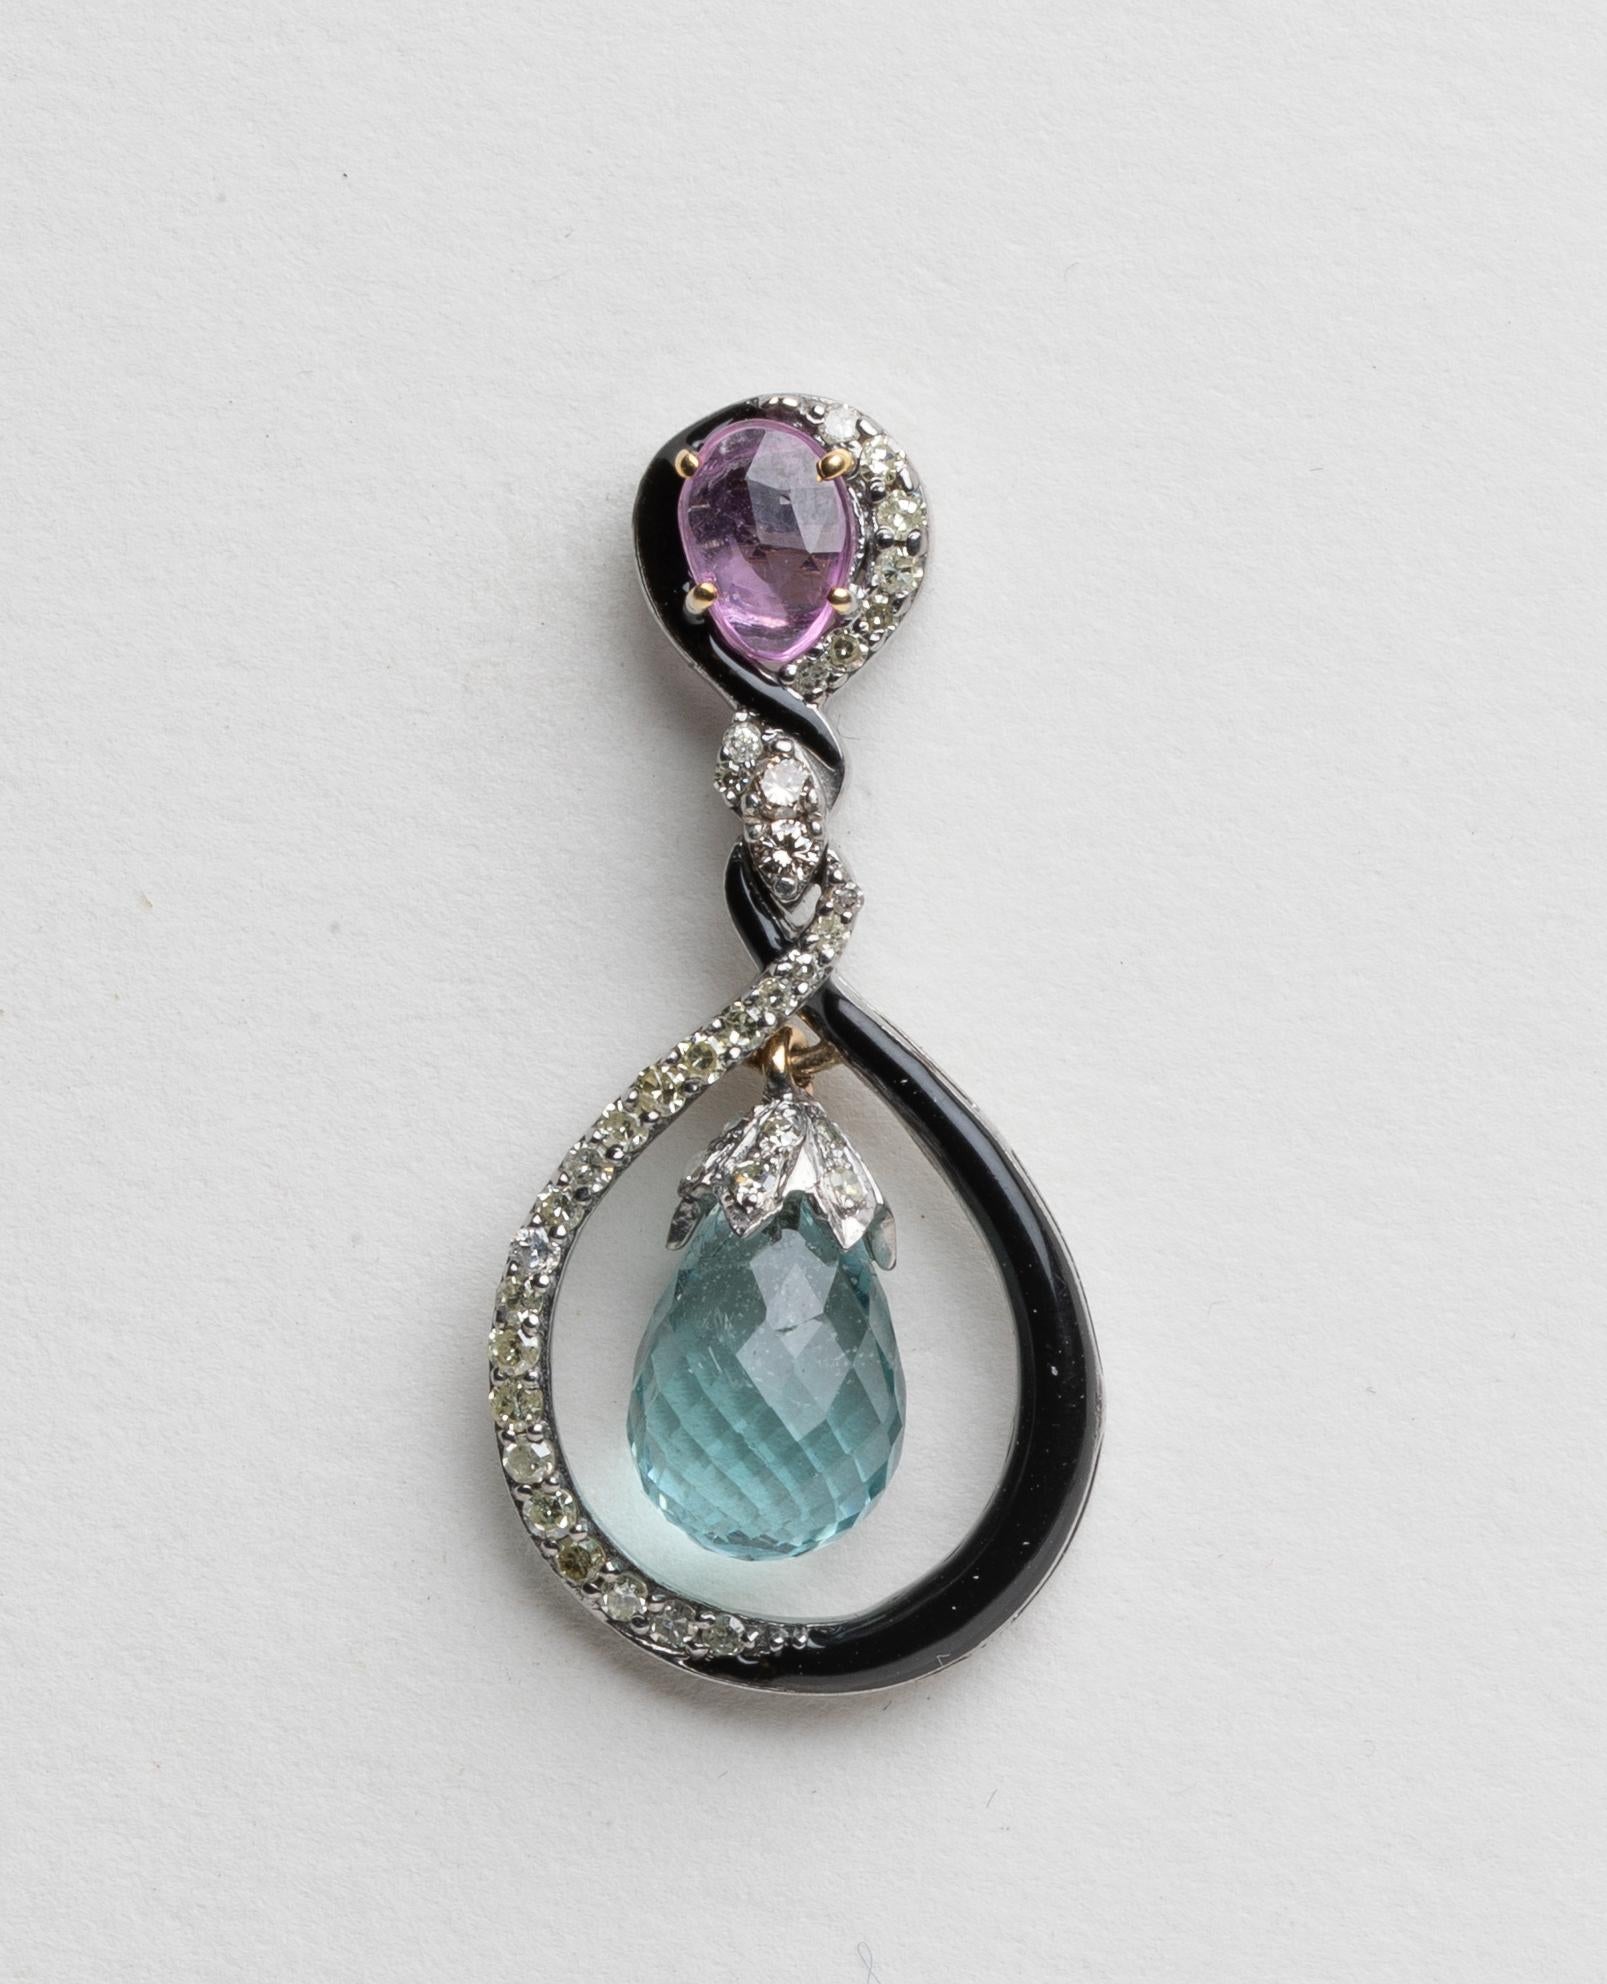 A pair of interlocking black onyx and pave`-set diamonds with faceted aquamarine briolette in the center with a diamond end cap; and a faceted pear-shaped pink tourmaline at the top.  18K gold post for pierced ears.  Aquamarine is 4.10 carats;